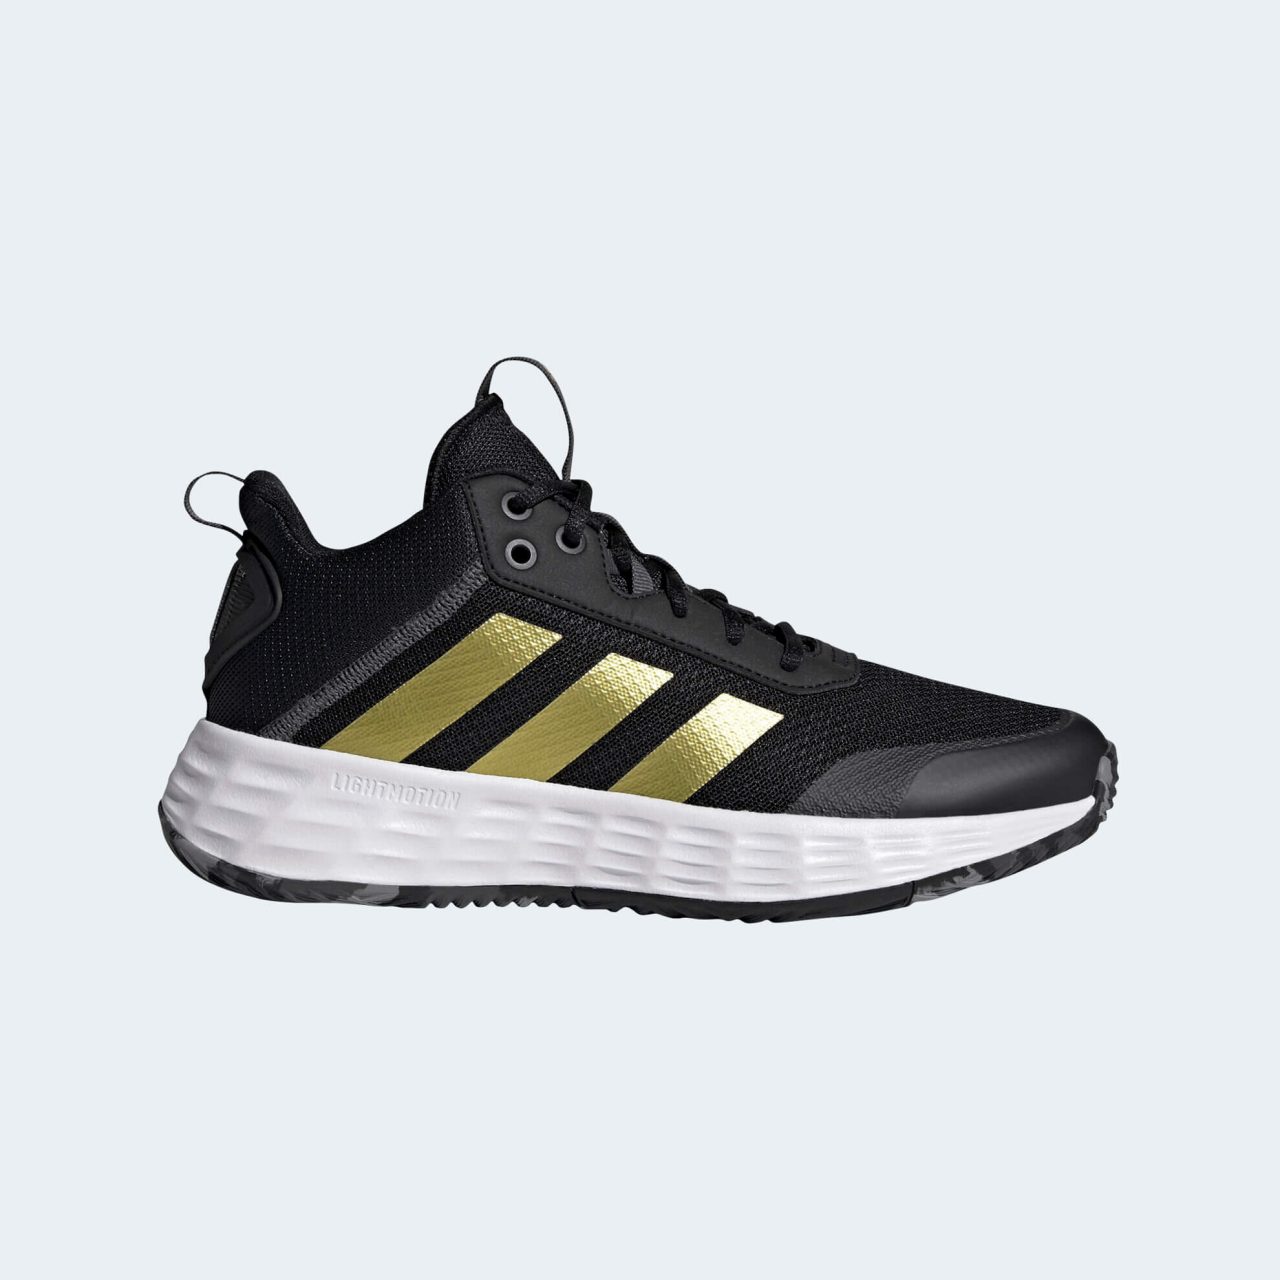 Ownthegame 2.0. Кроссовки Ownthegame 2.0. Кроссовки adidas Ownthegame 2.0 h00471. Кроссовки adidas Ownthegame. Кроссовки adidas Ownthegame 2.0 k.